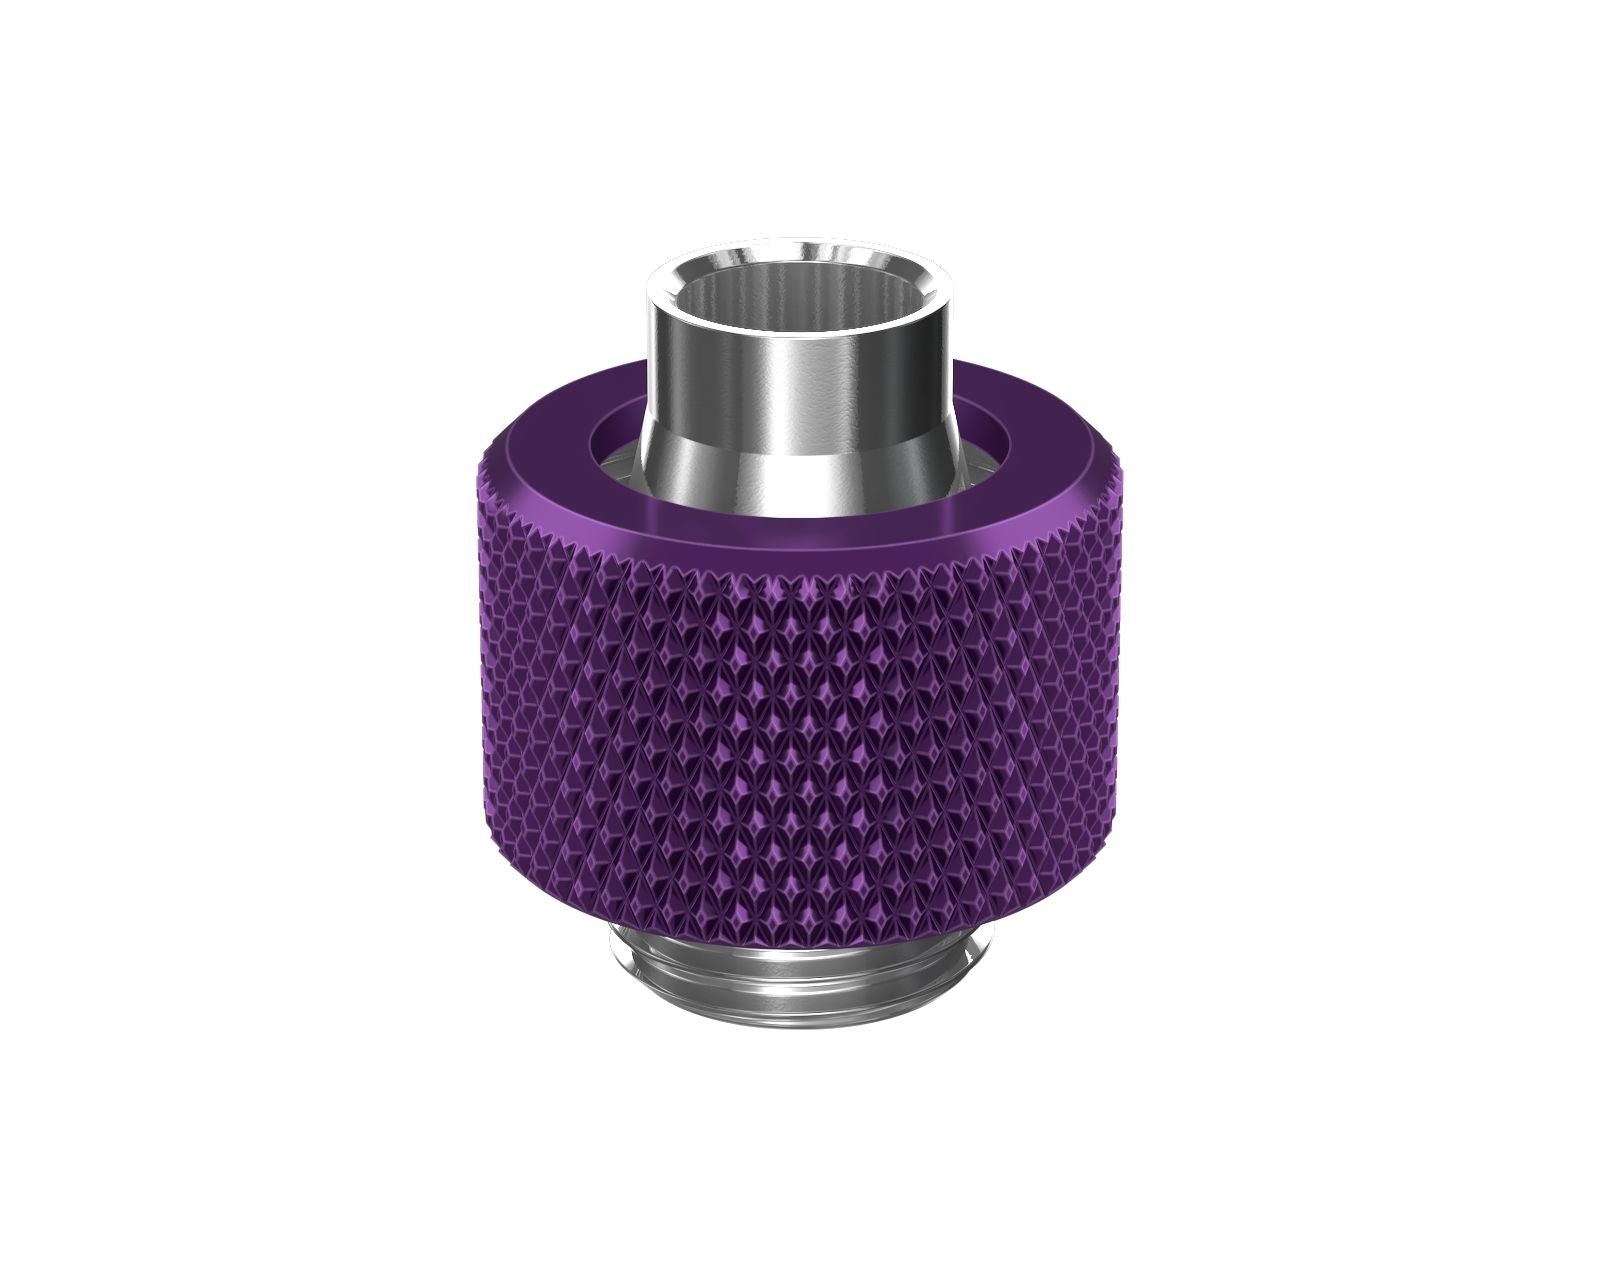 PrimoChill SecureFit SX - Premium Compression Fitting For 3/8in ID x 1/2in OD Flexible Tubing (F-SFSX12) - Available in 20+ Colors, Custom Watercooling Loop Ready - Candy Purple